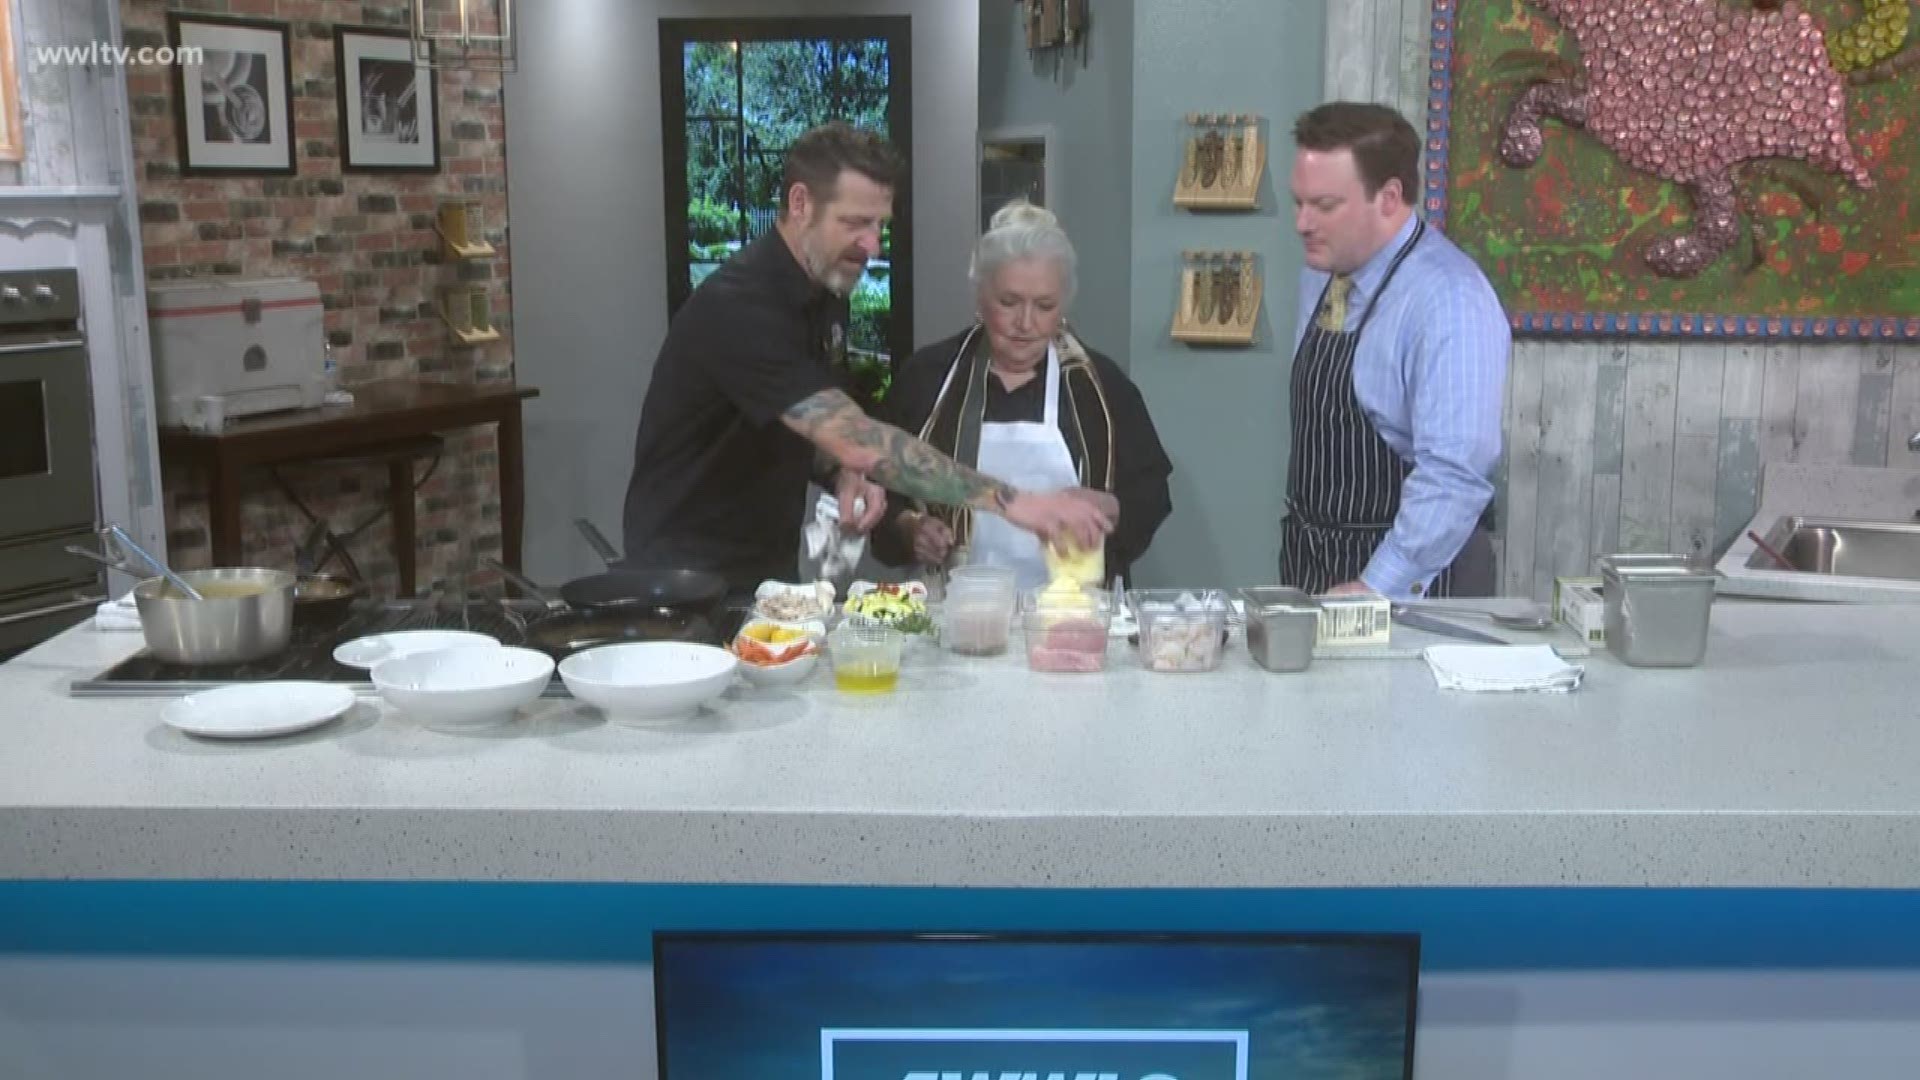 We’re getting our mojo back in author Kit Wohl’s Cookbook Studio with chef/owner Eric Cook from Gris Gris, the magically-inspired restaurant on Magazine Street. He demonstrates his Cast Iron Seared Fish and Shrimp dish.